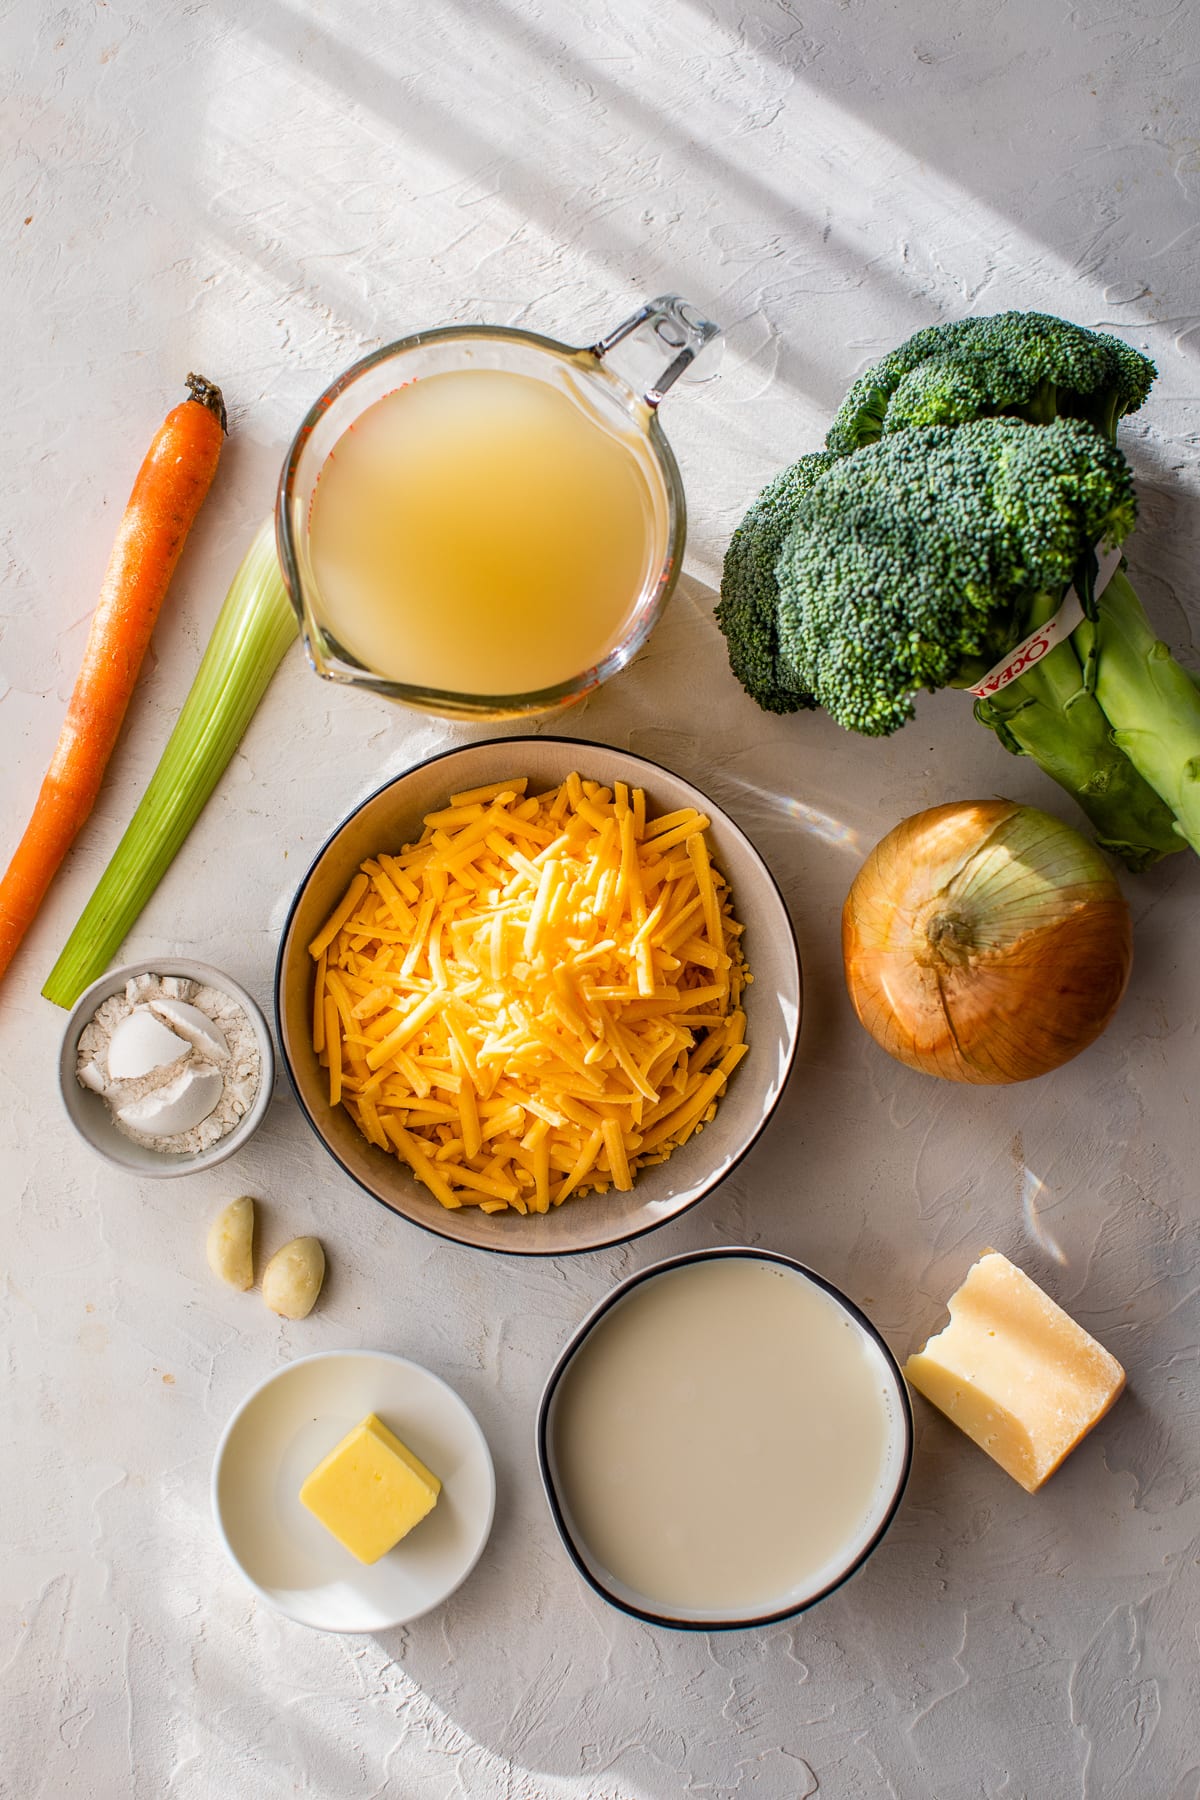 Ingredients for Broccoli Cheddar Soup